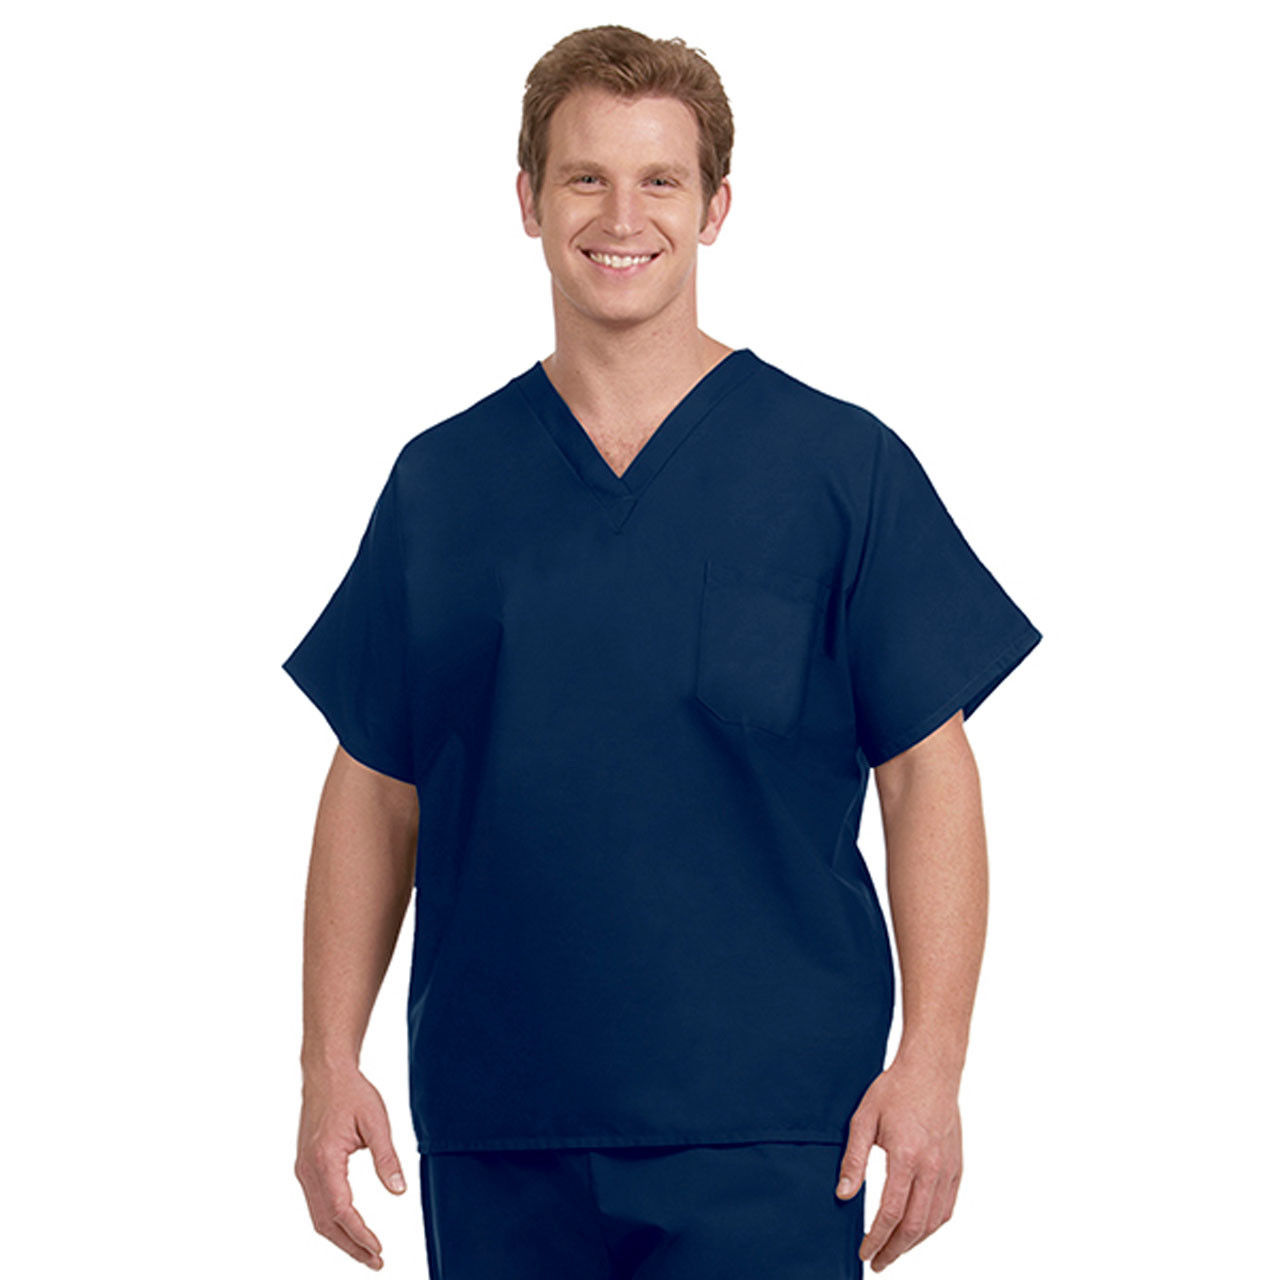 Are these scrub tops suitable for both men and women?